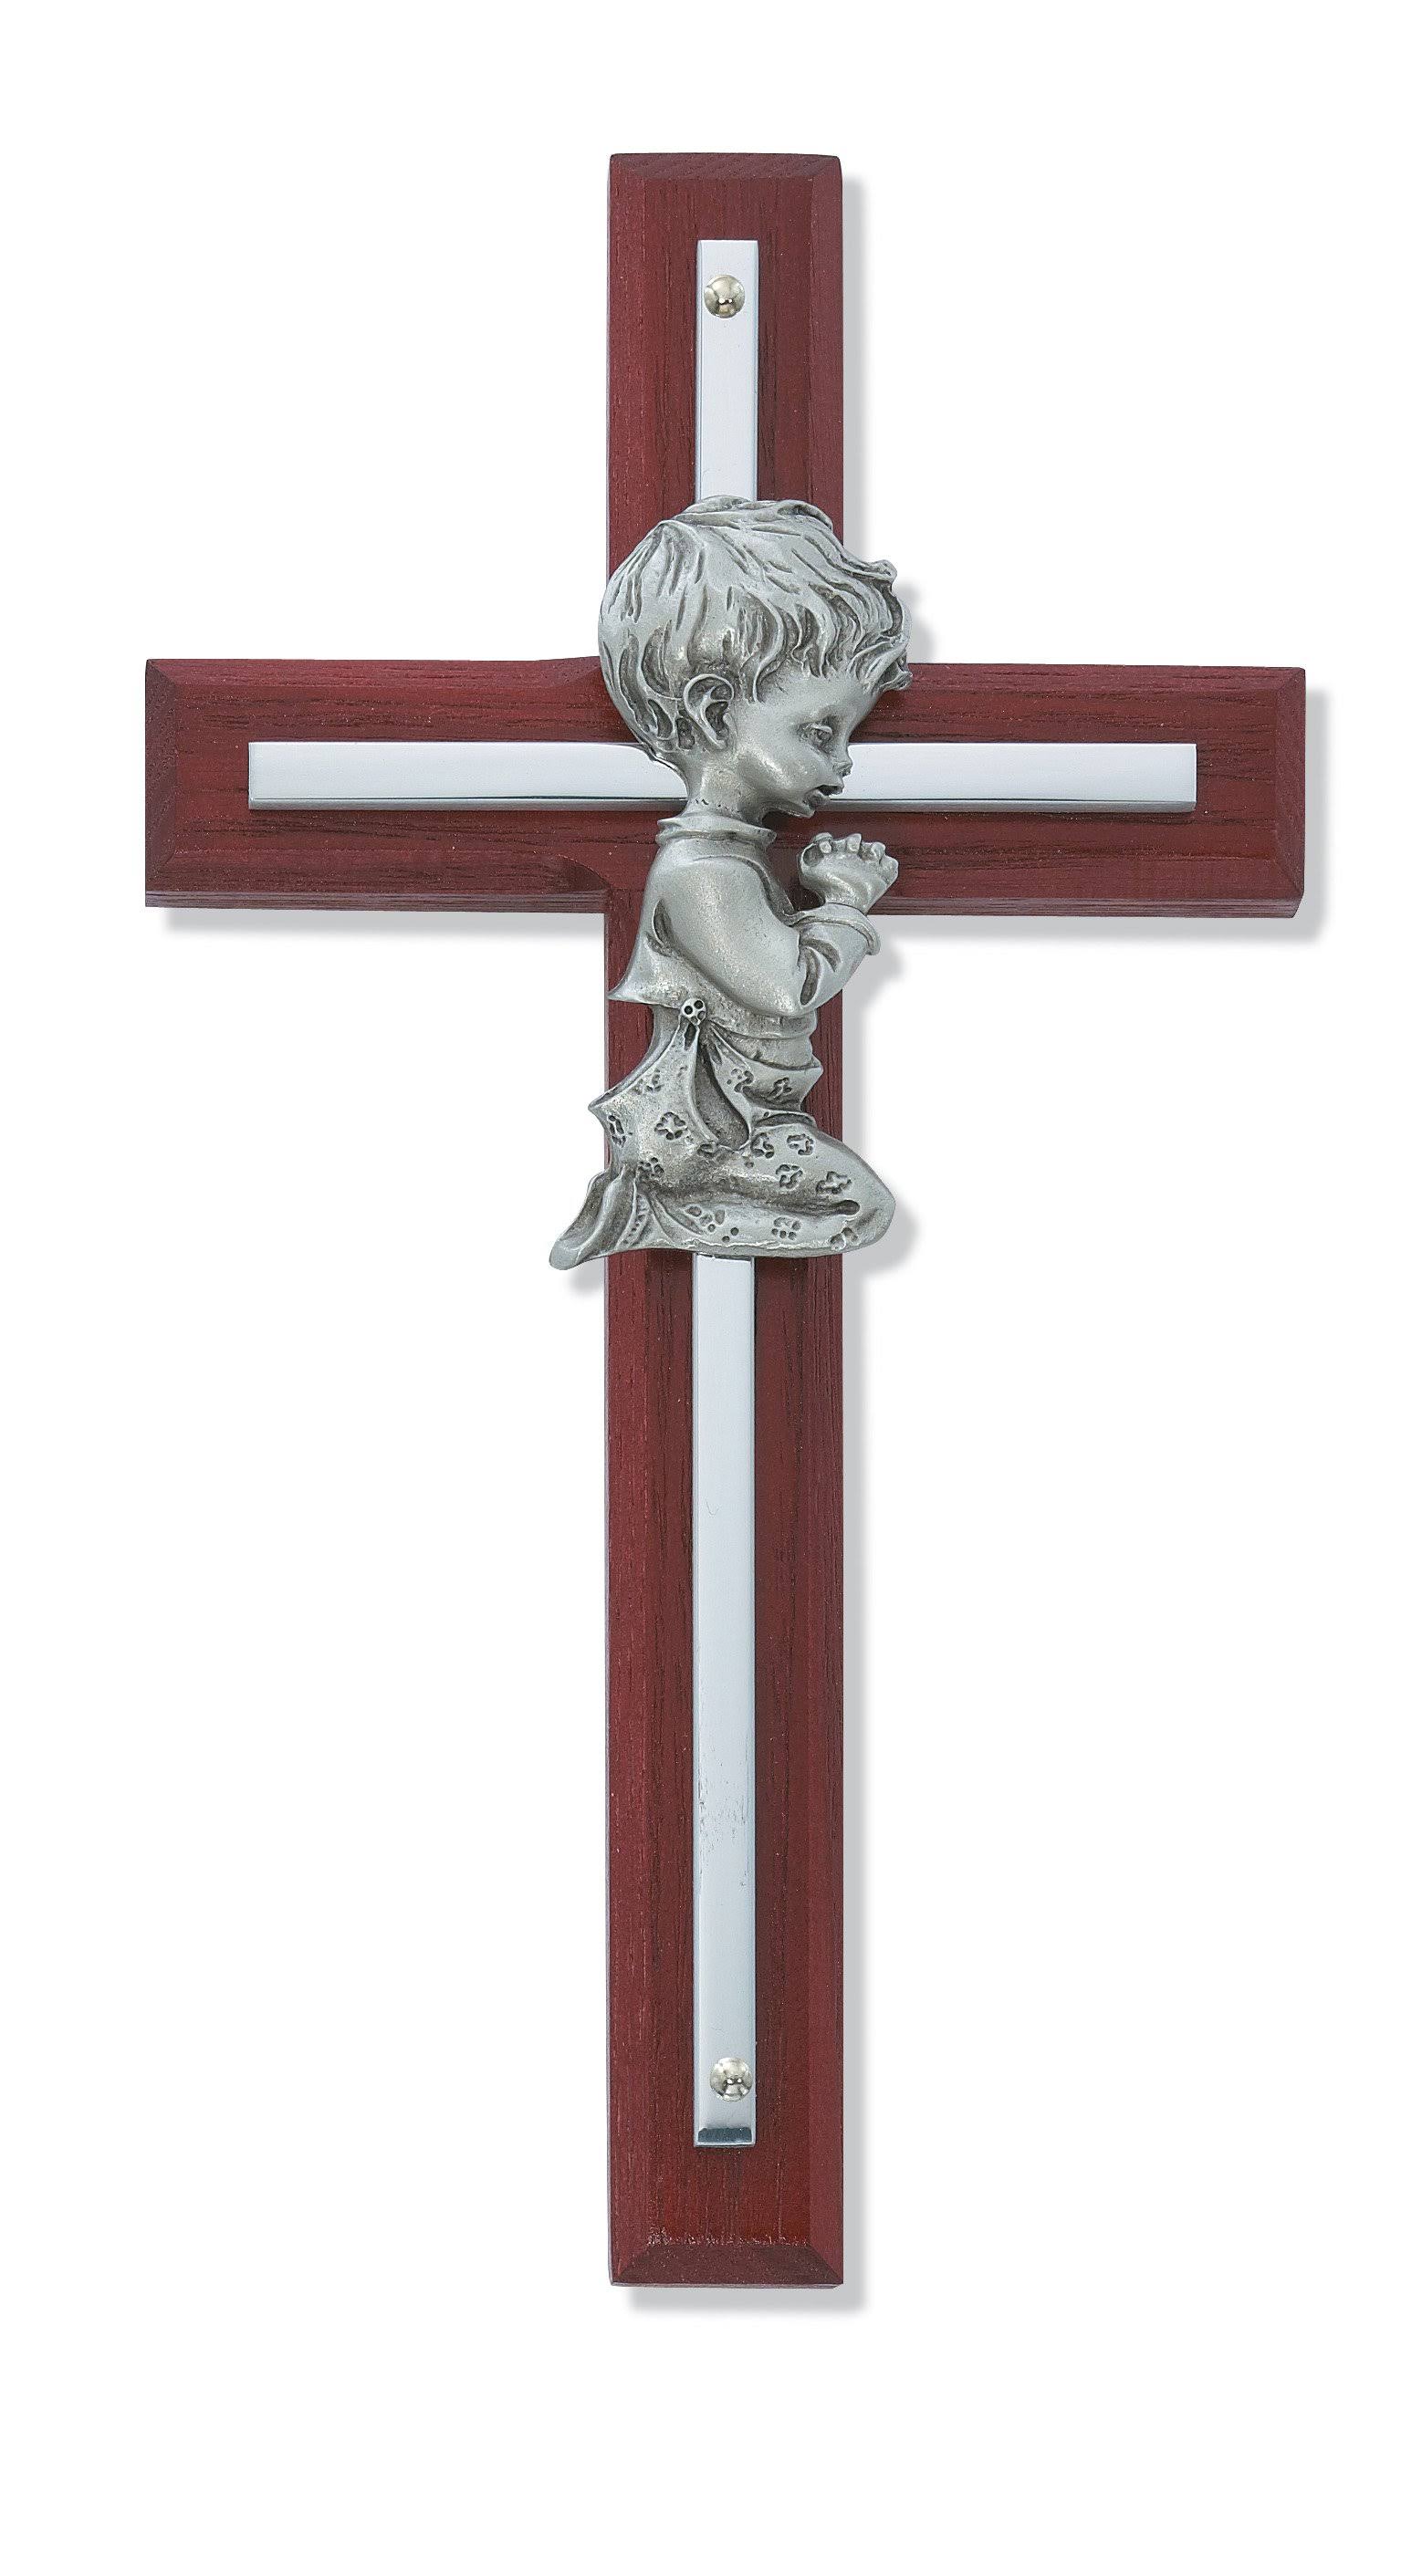 Silver Boy Wall Cross  Decor - Cherry Stained Wood, 6"